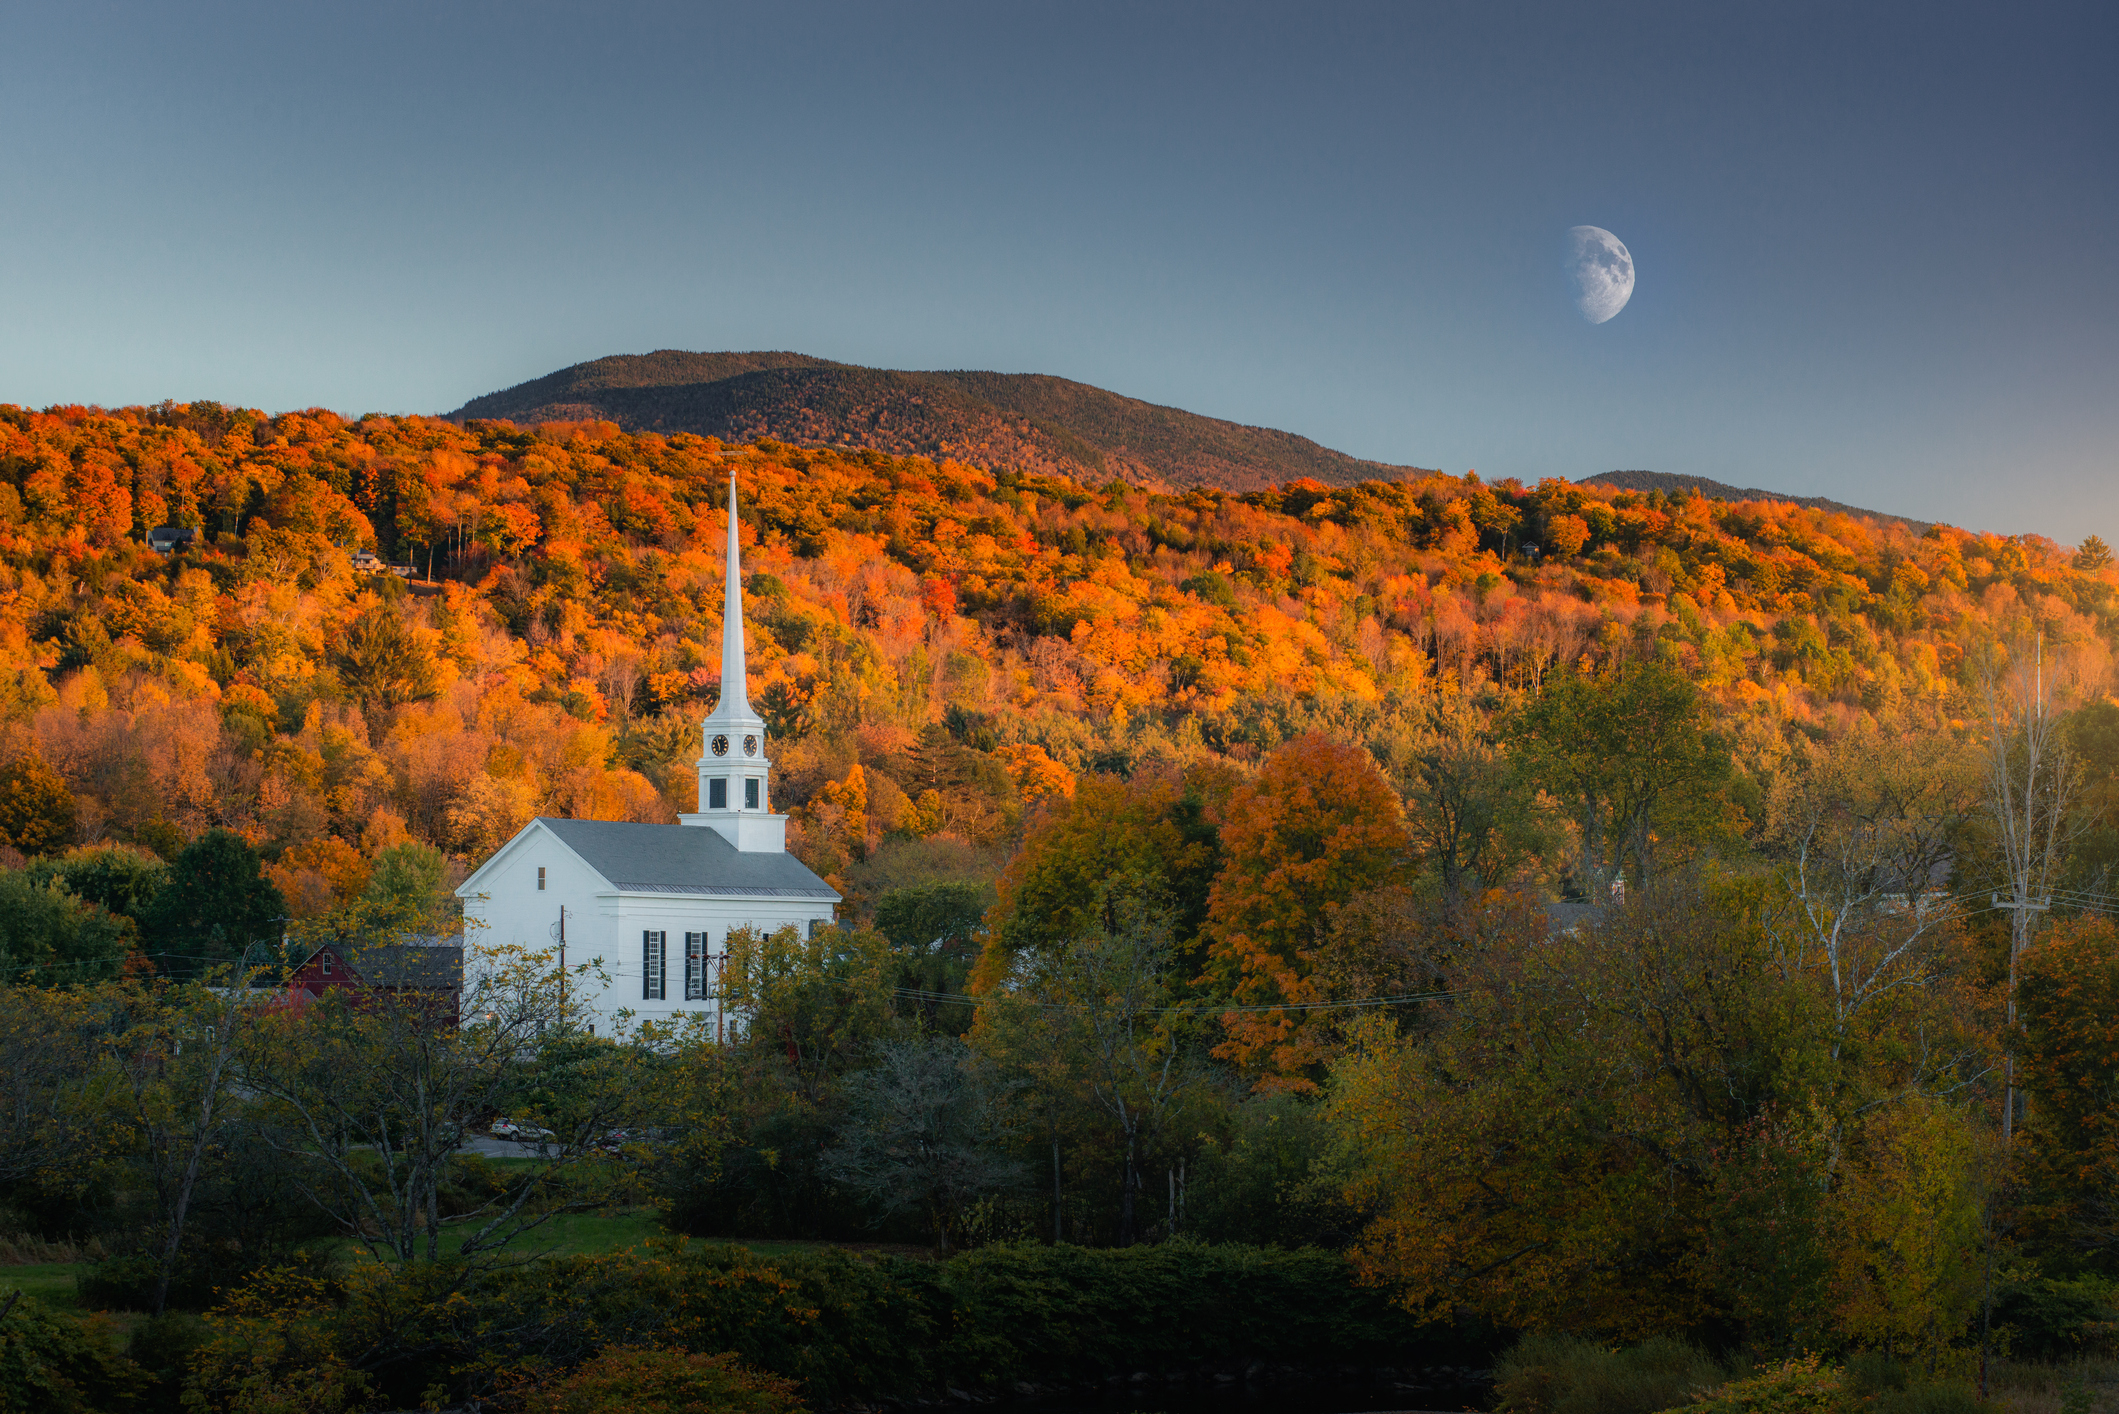 A church with a tall spire in front of a forested hill with fall foliage under a sky with a visible half moon